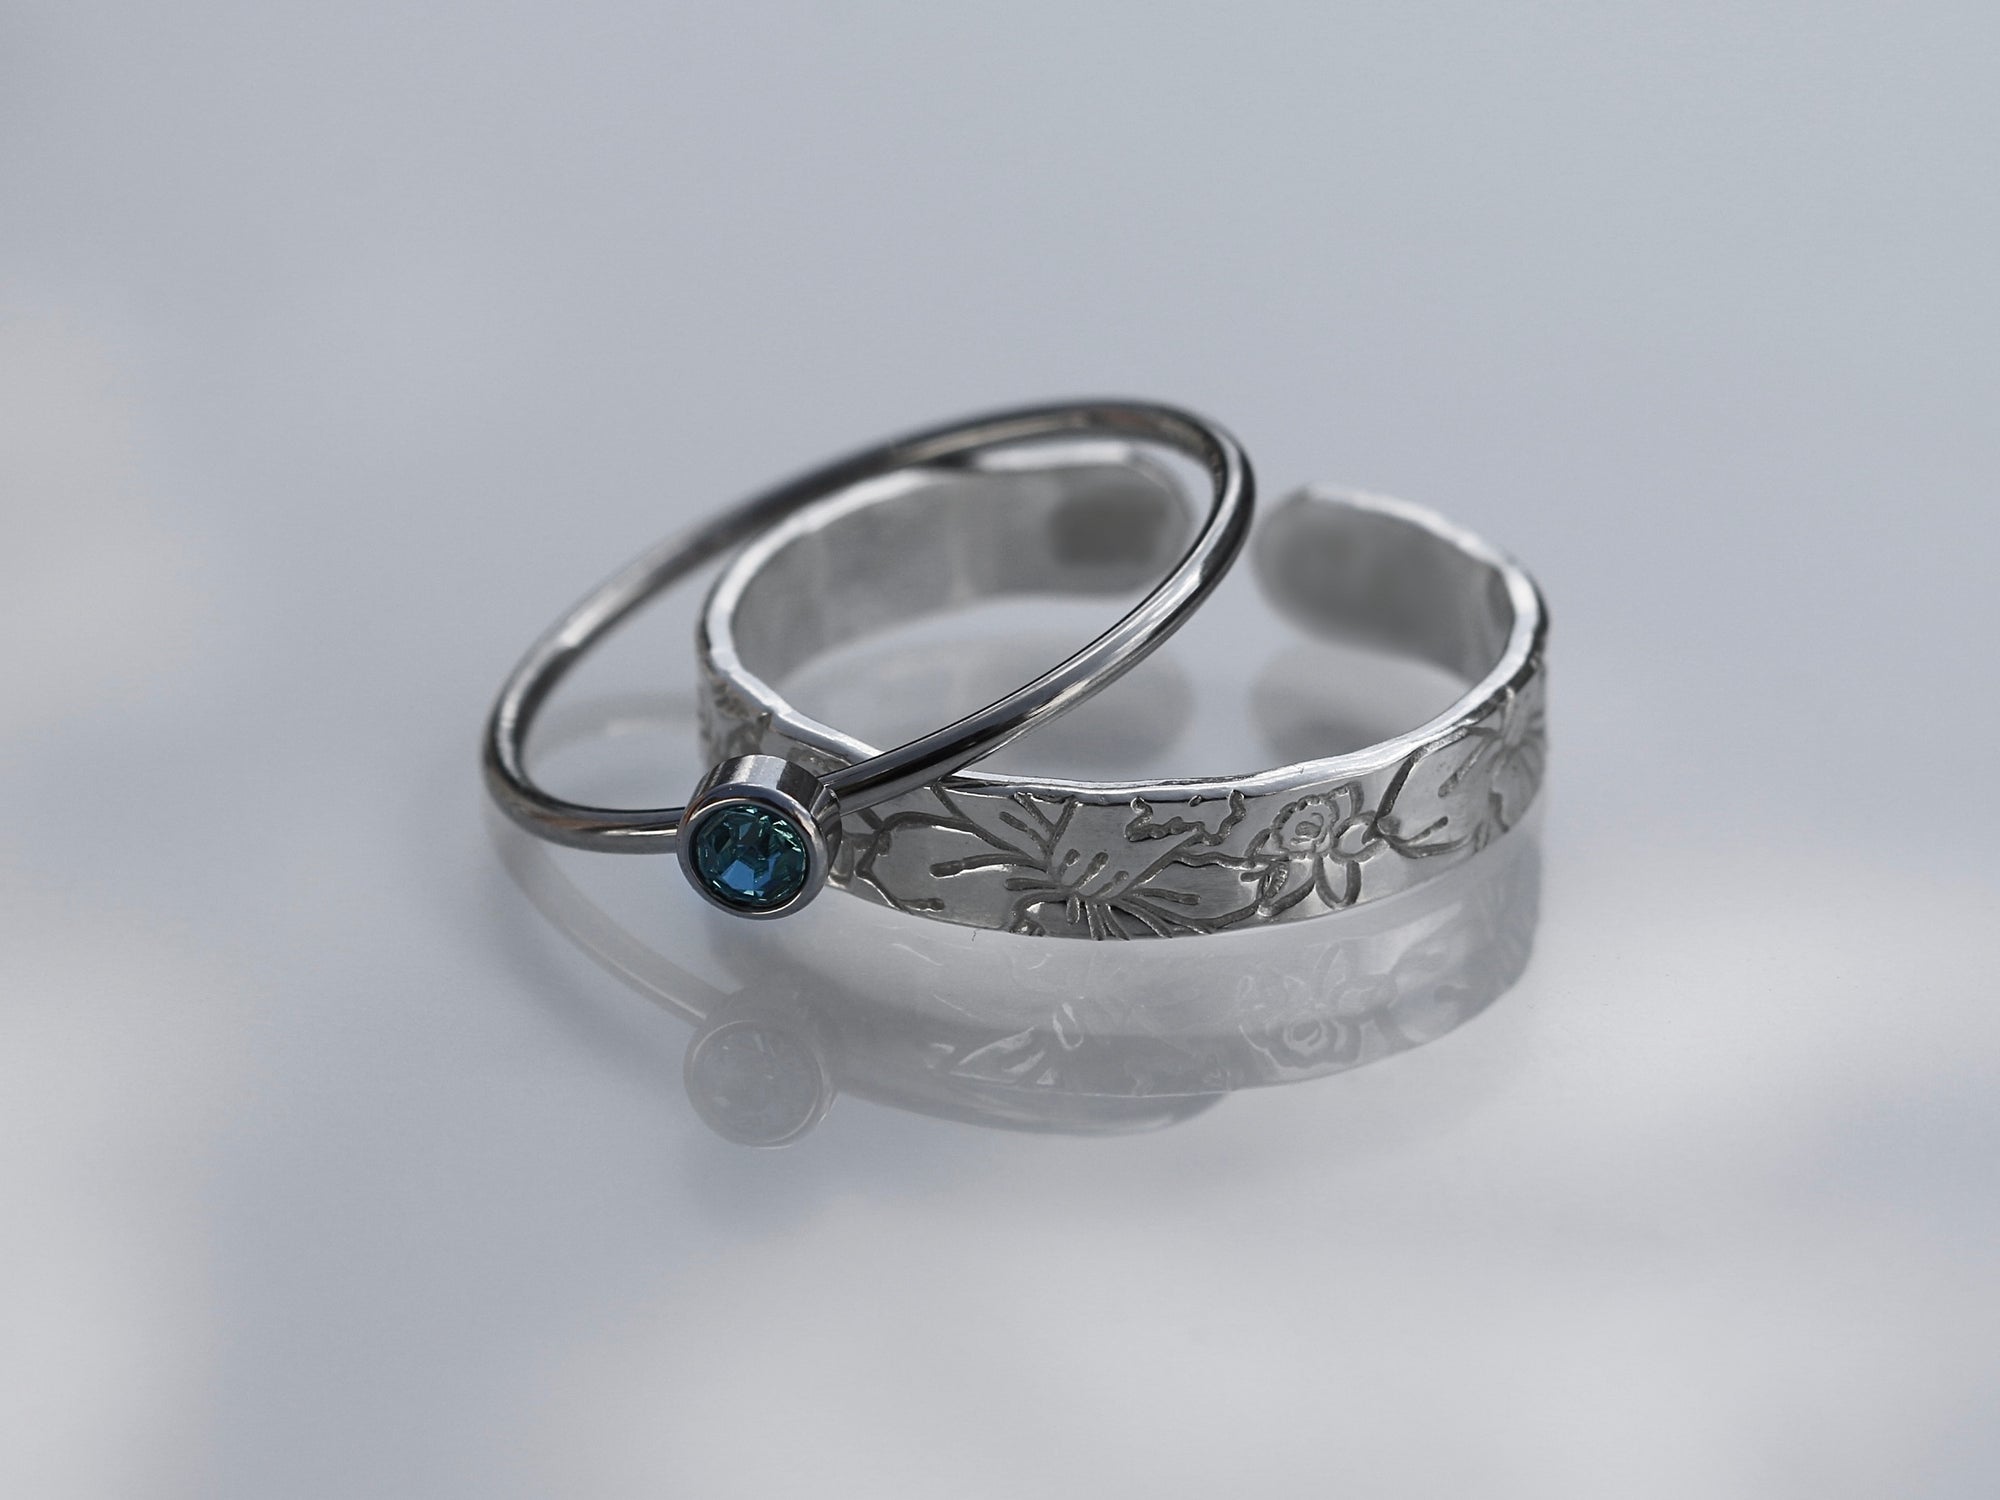 Birth Flower and Birthstone Stacking Ring Set - 2 Rings